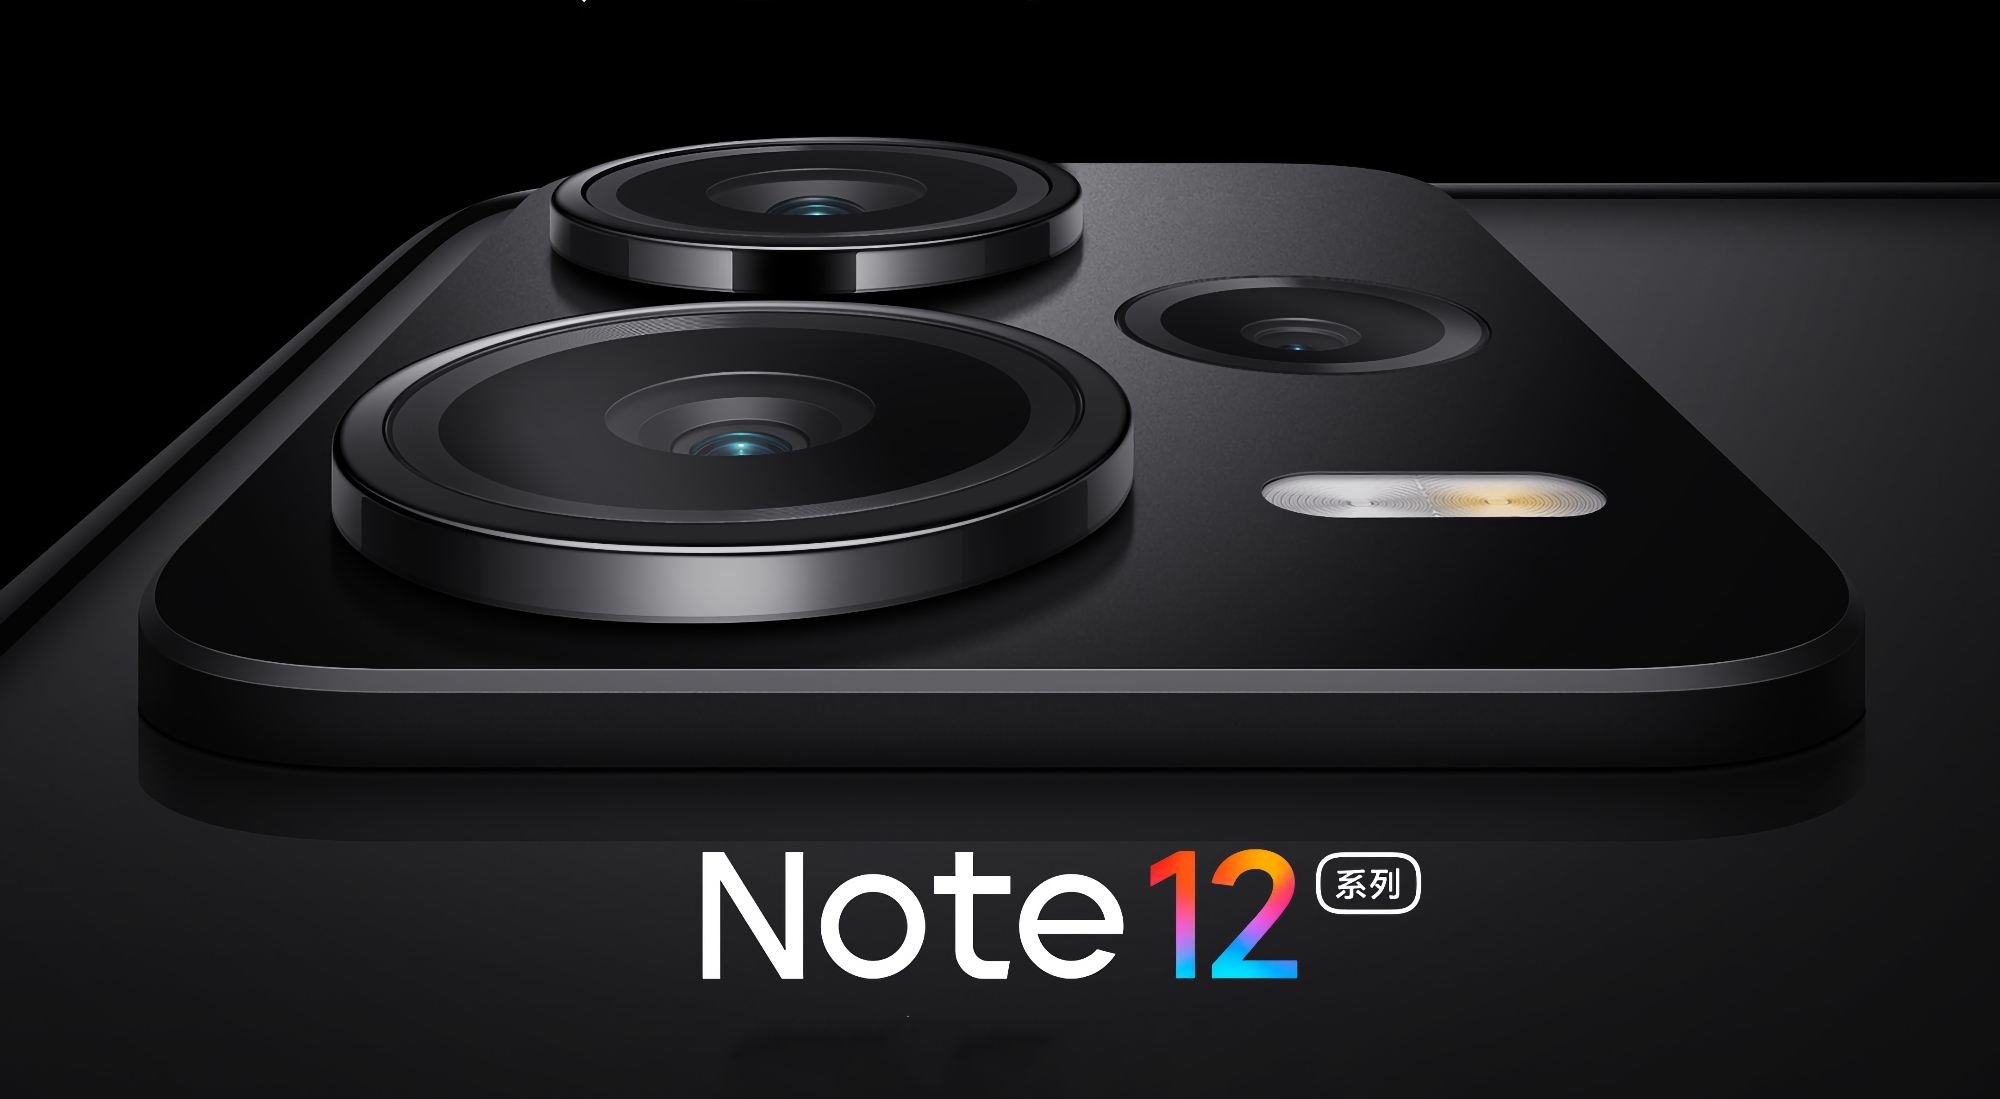 Like OnePlus 10T and ASUS Zefone 9: One of the smartphones Redmi Note 12 will get a camera with a Sony IMX766 module